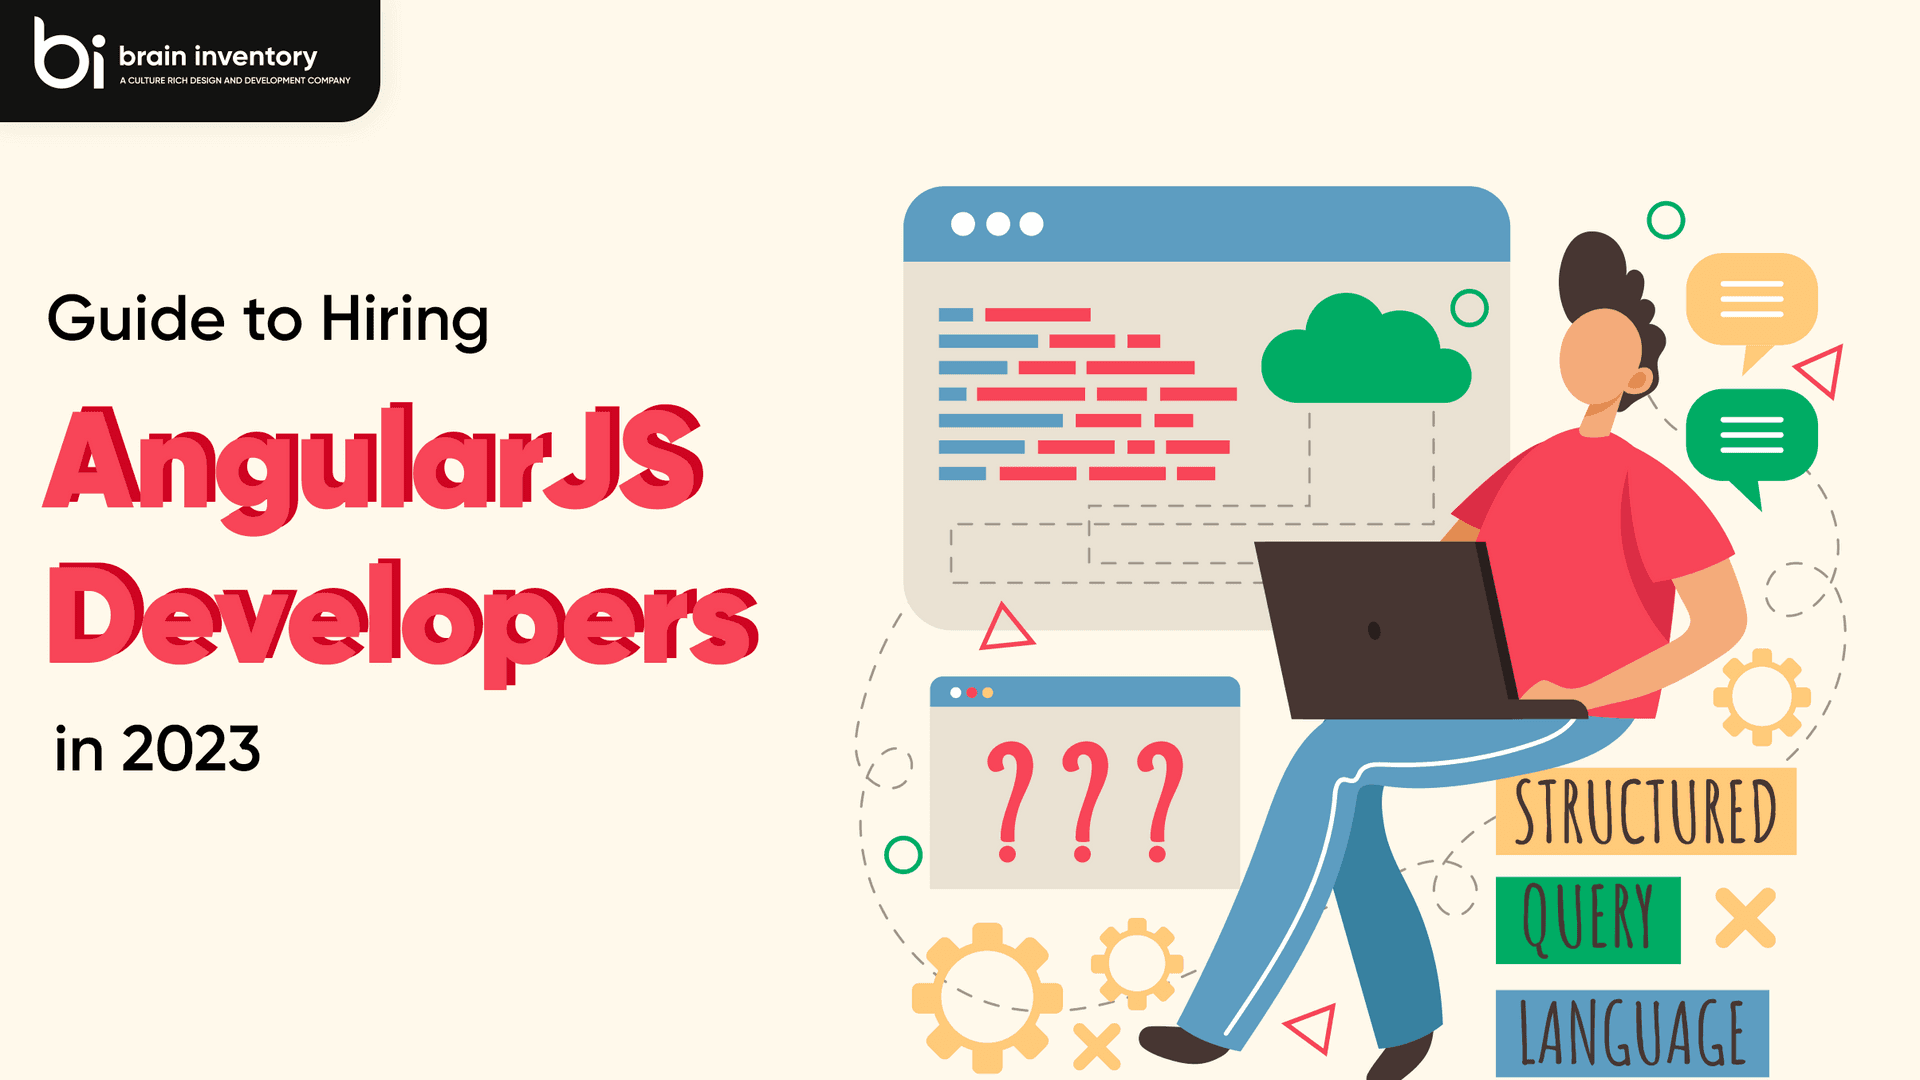 Guide to Hiring AngularJS Developers in 2023